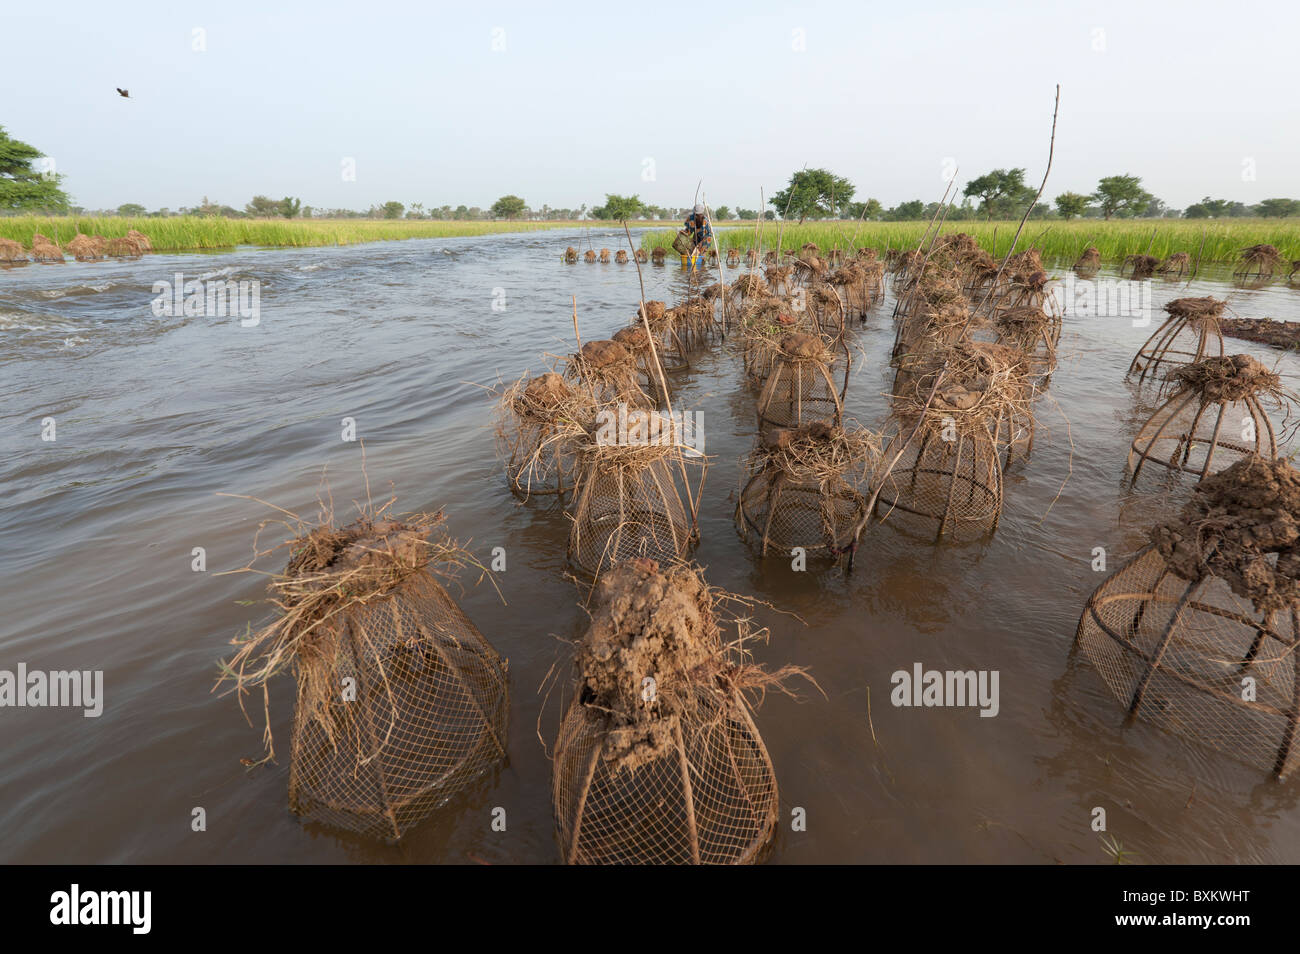 Bozo villager catching fish with traps in the flooded fields of the 'Niger Inland Delta' near Djenné, Mali. Stock Photo